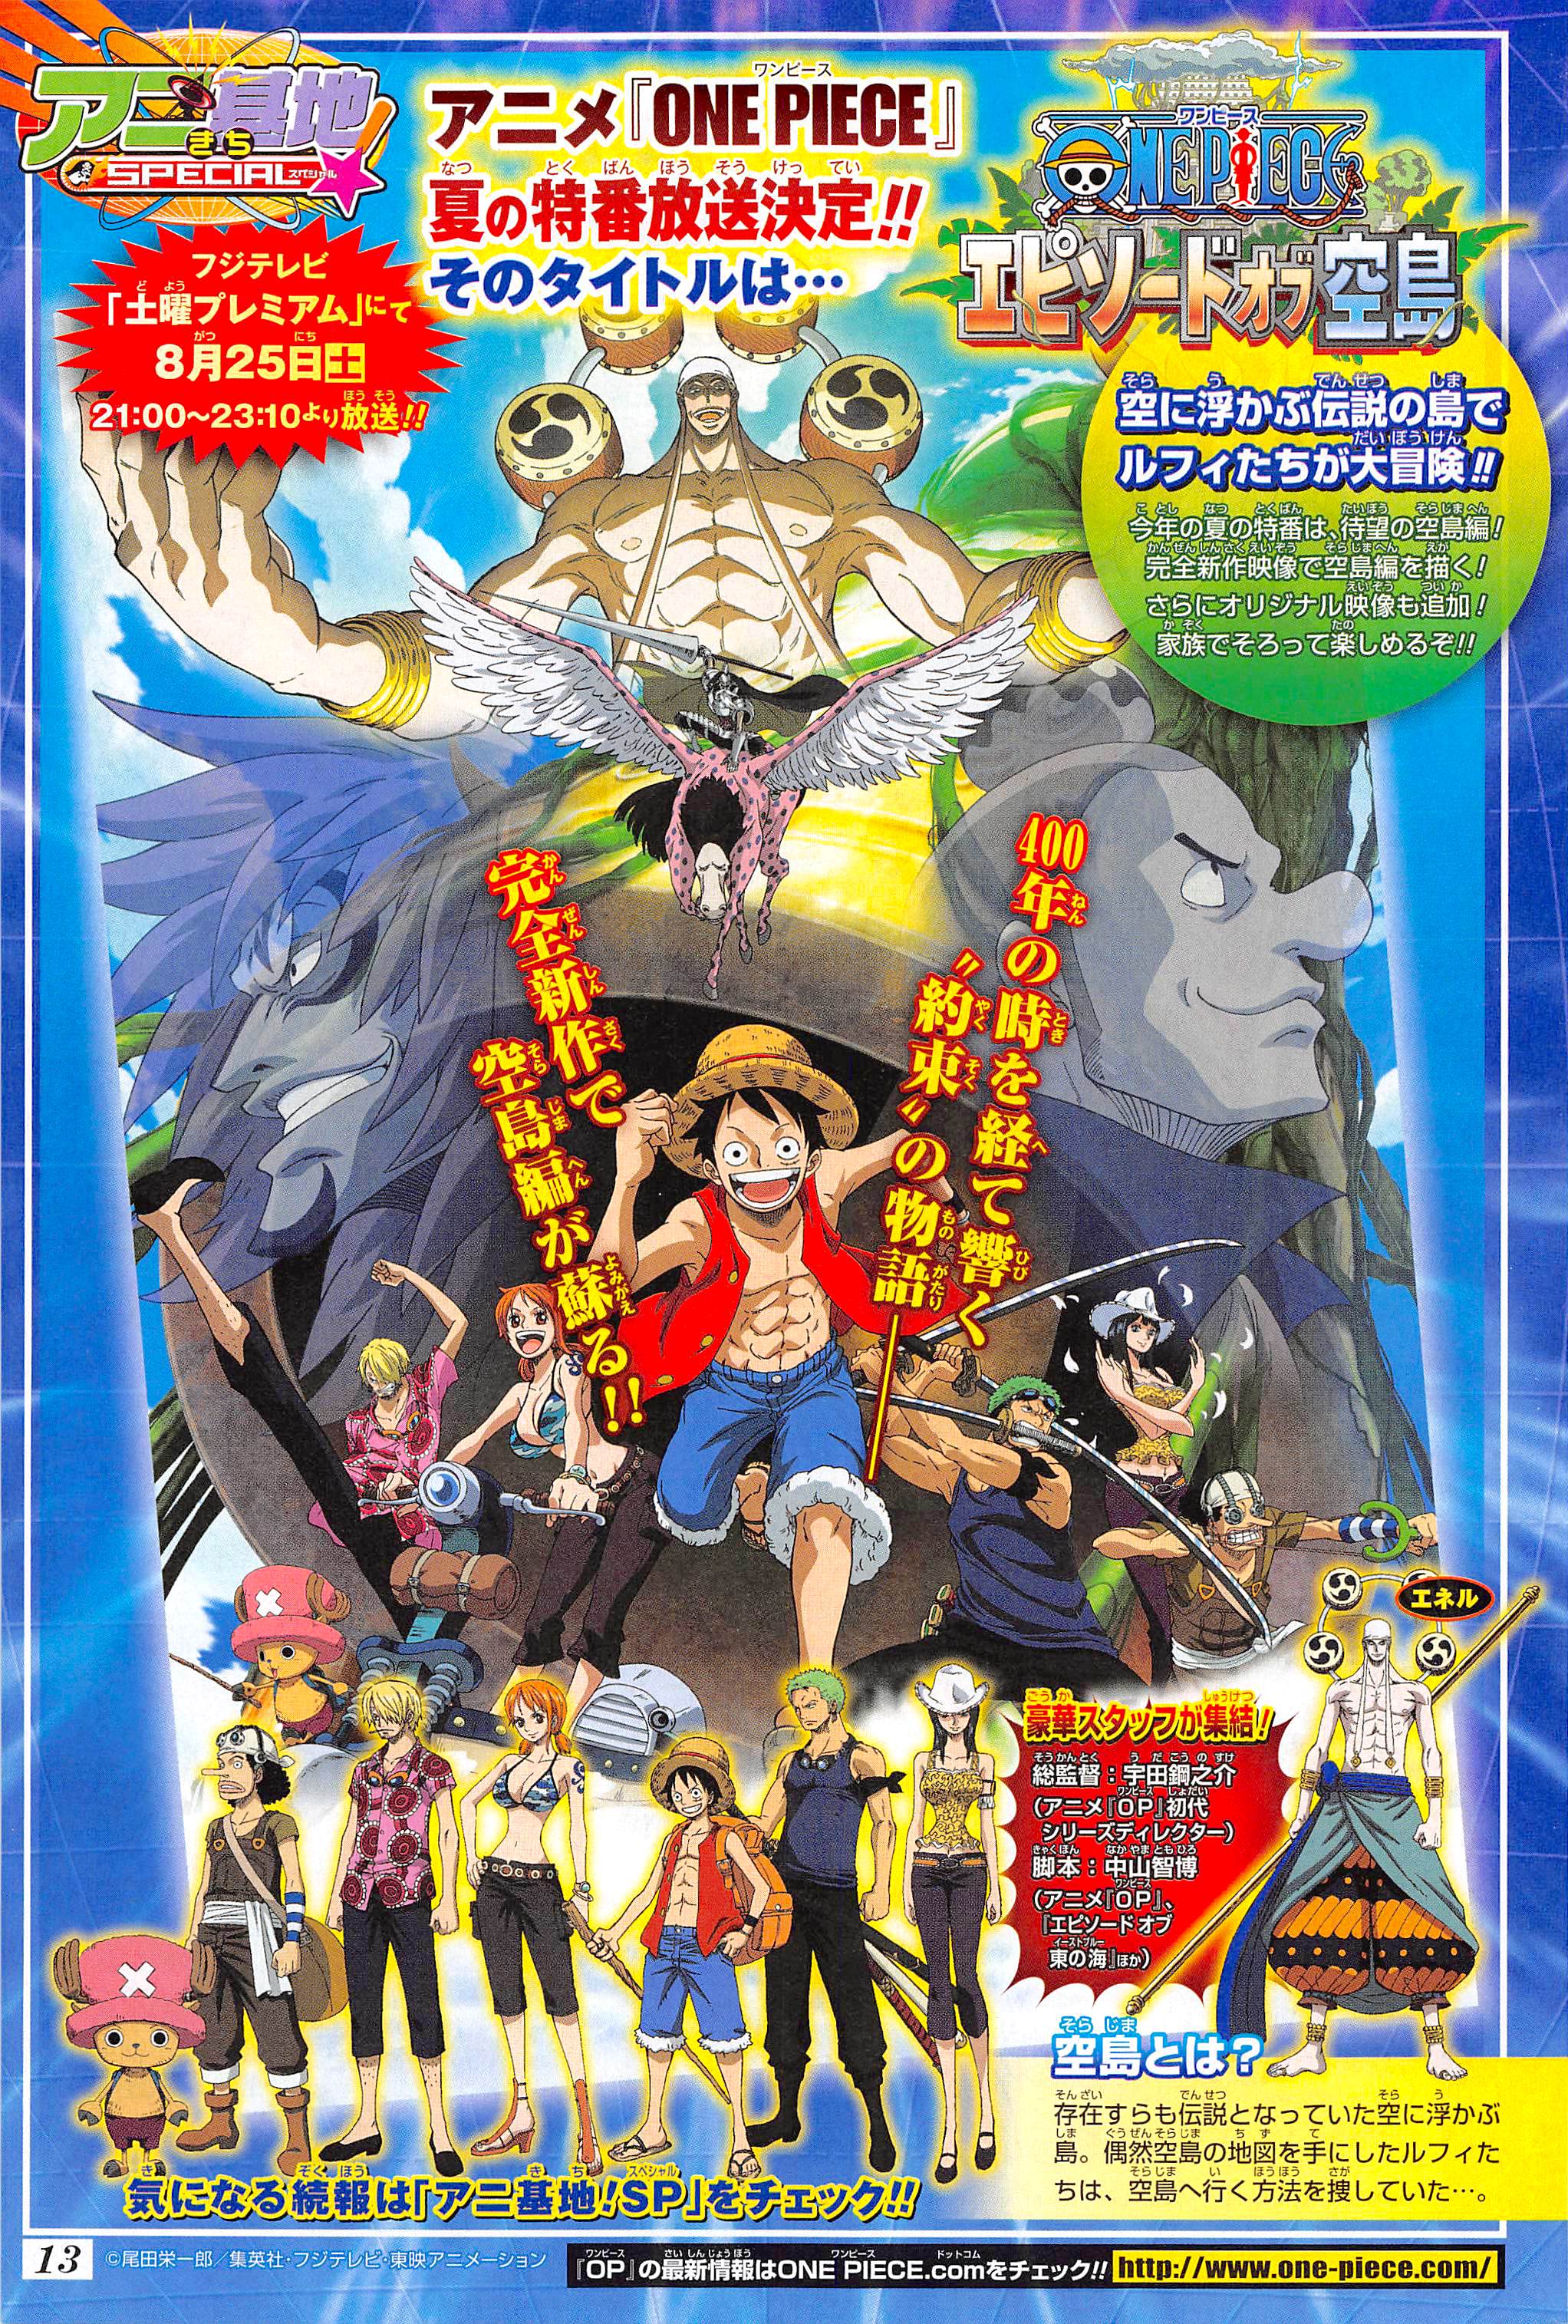 One Piece Episode Of Skypiea New Tv Special 25th August 18